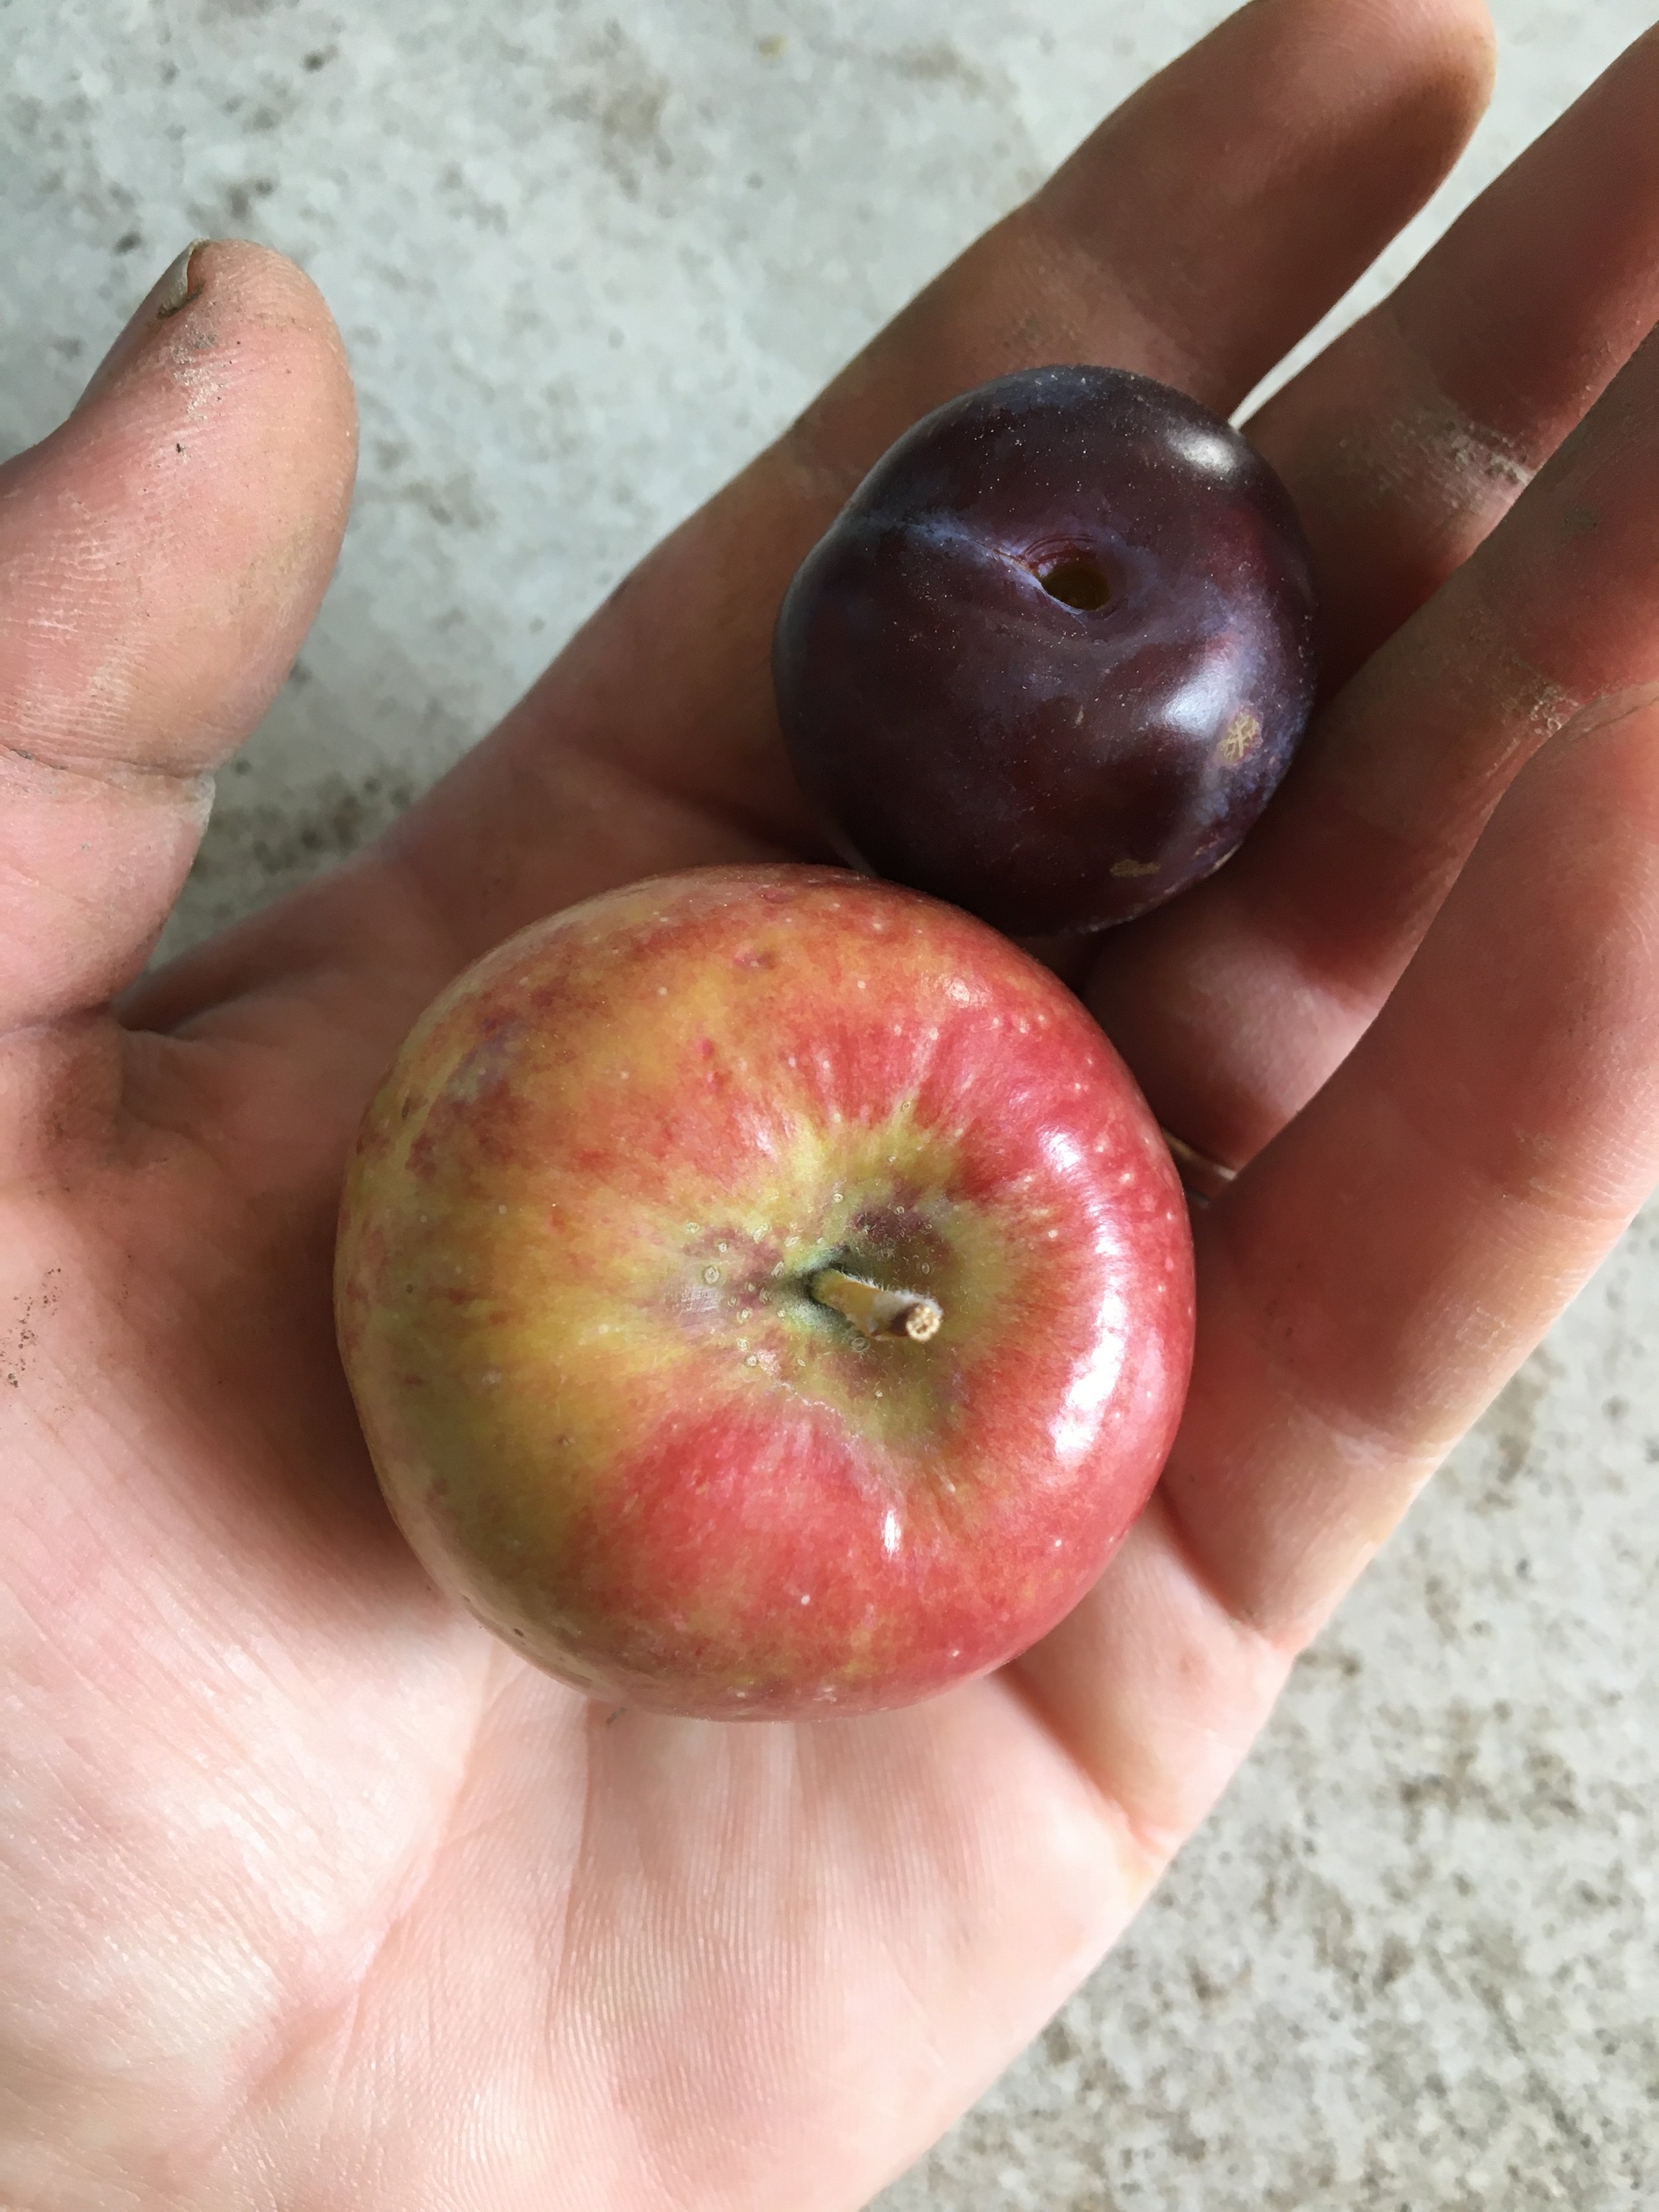 Our one and only plum and apple so far